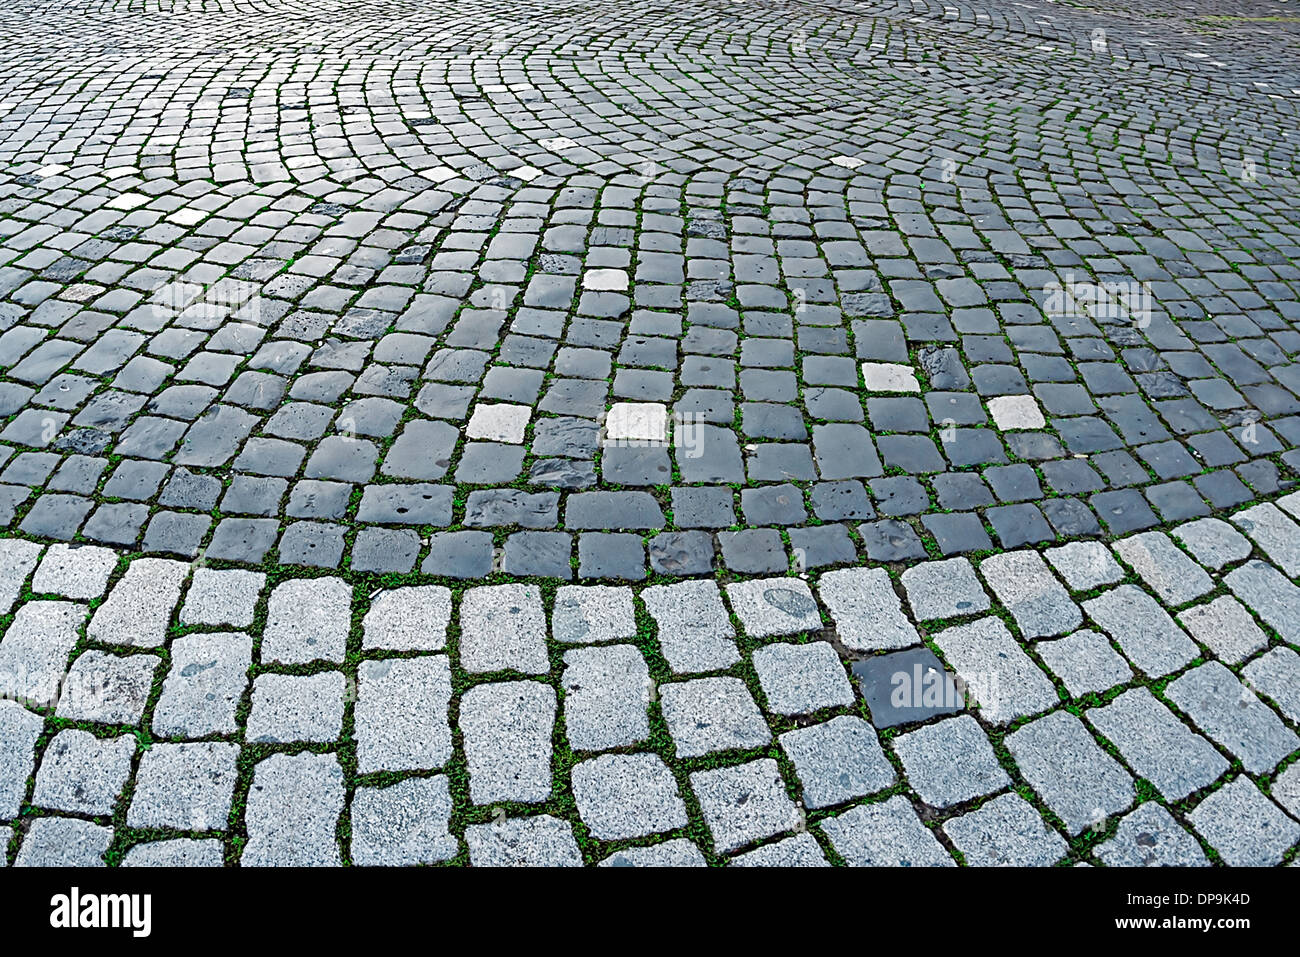 Detail of cobblestone sidewalk made of cubic stones. Stock Photo